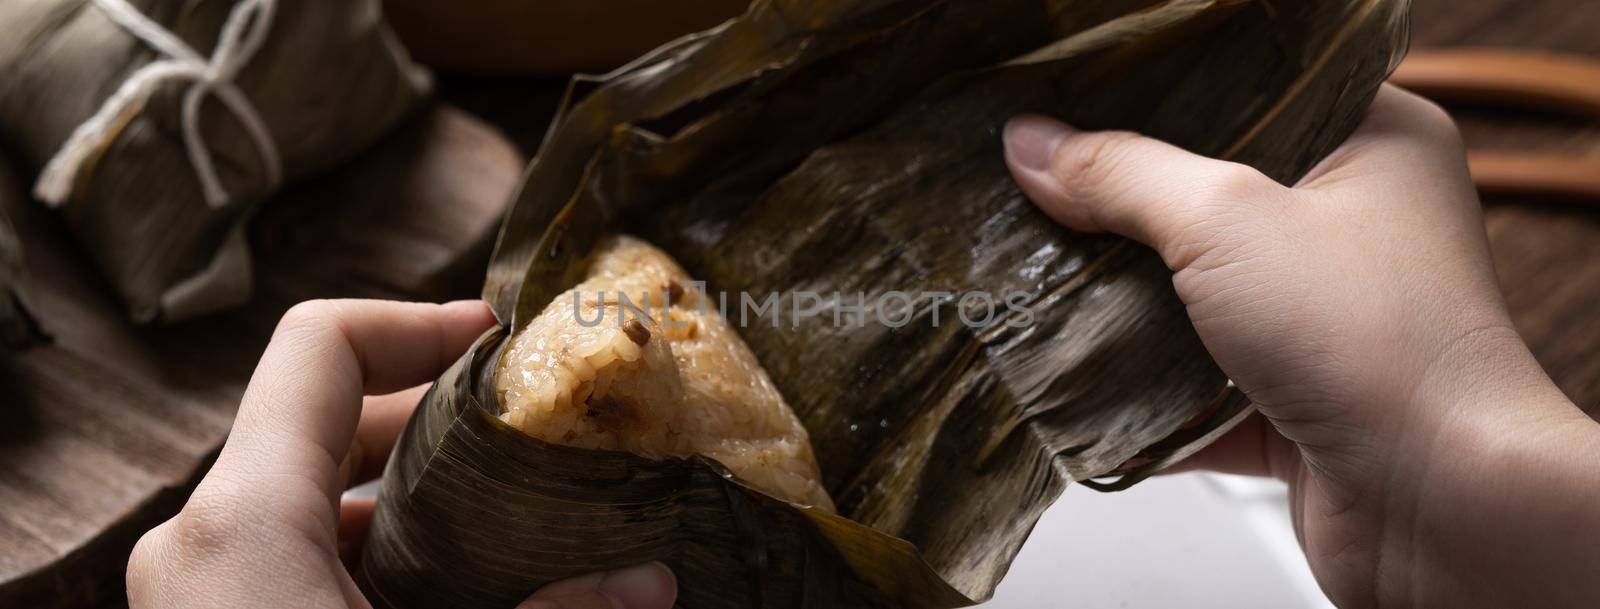 Eating Zongzi rice dumpling for Chinese traditional Dragon Boat Festival (Duanwu Festival) celebration event concept.